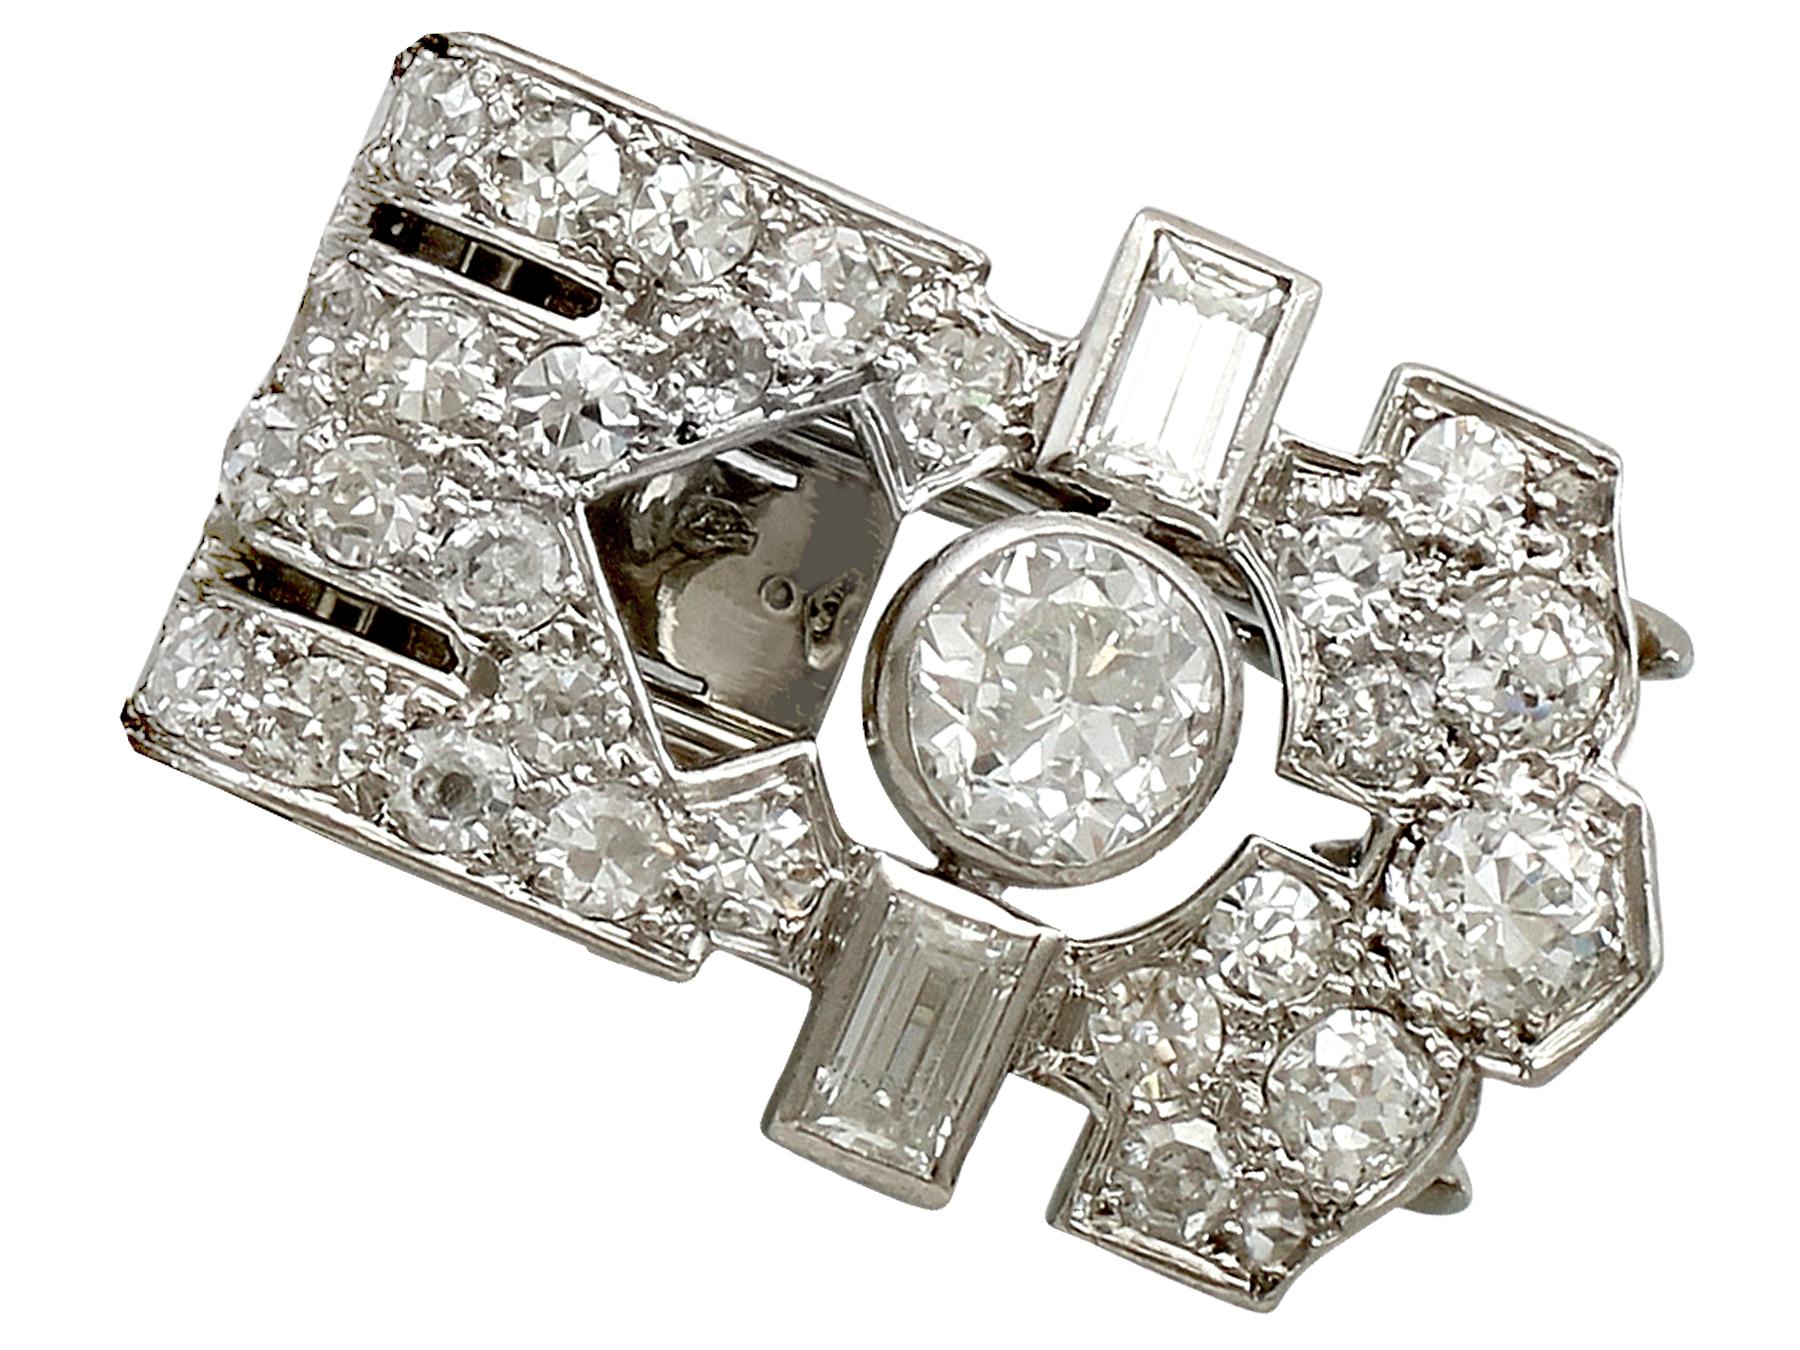 Antique French 2.58 Carat Diamond, Platinum and White Gold Double Clip Brooch 1